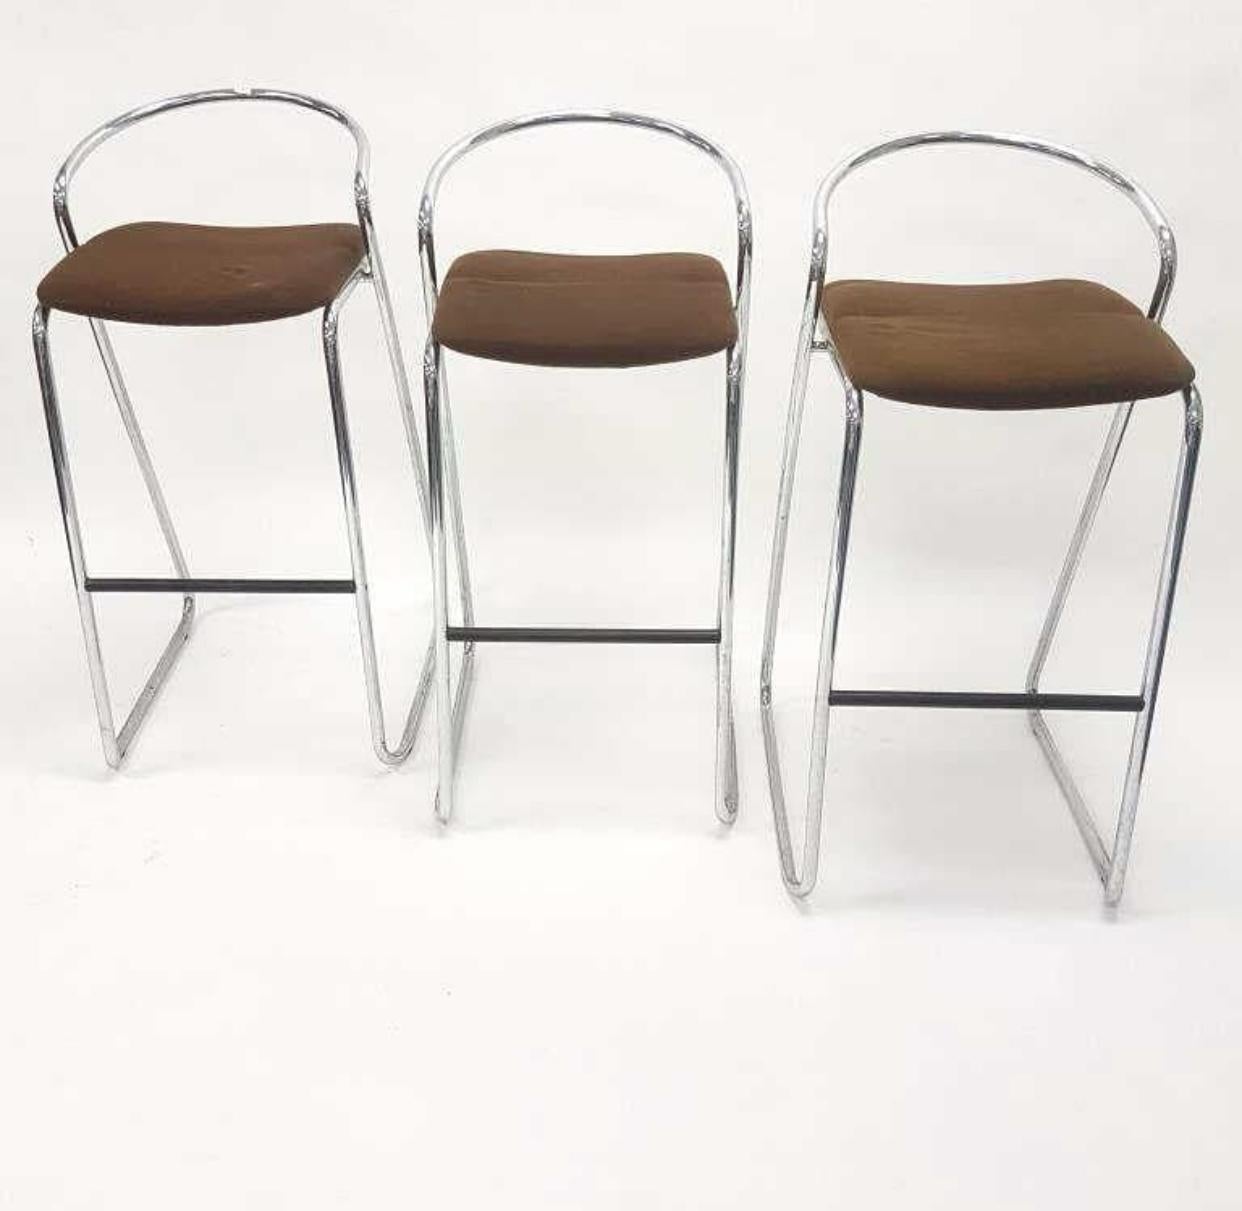 Set of three minimalist barstools by Hank Lowenstein, manufactured in Italy. The barstools are made of chromed steel bars and wool upholstered seats. The padding of the seats is slightly dented. It can either be replaced or steamed to bring it back